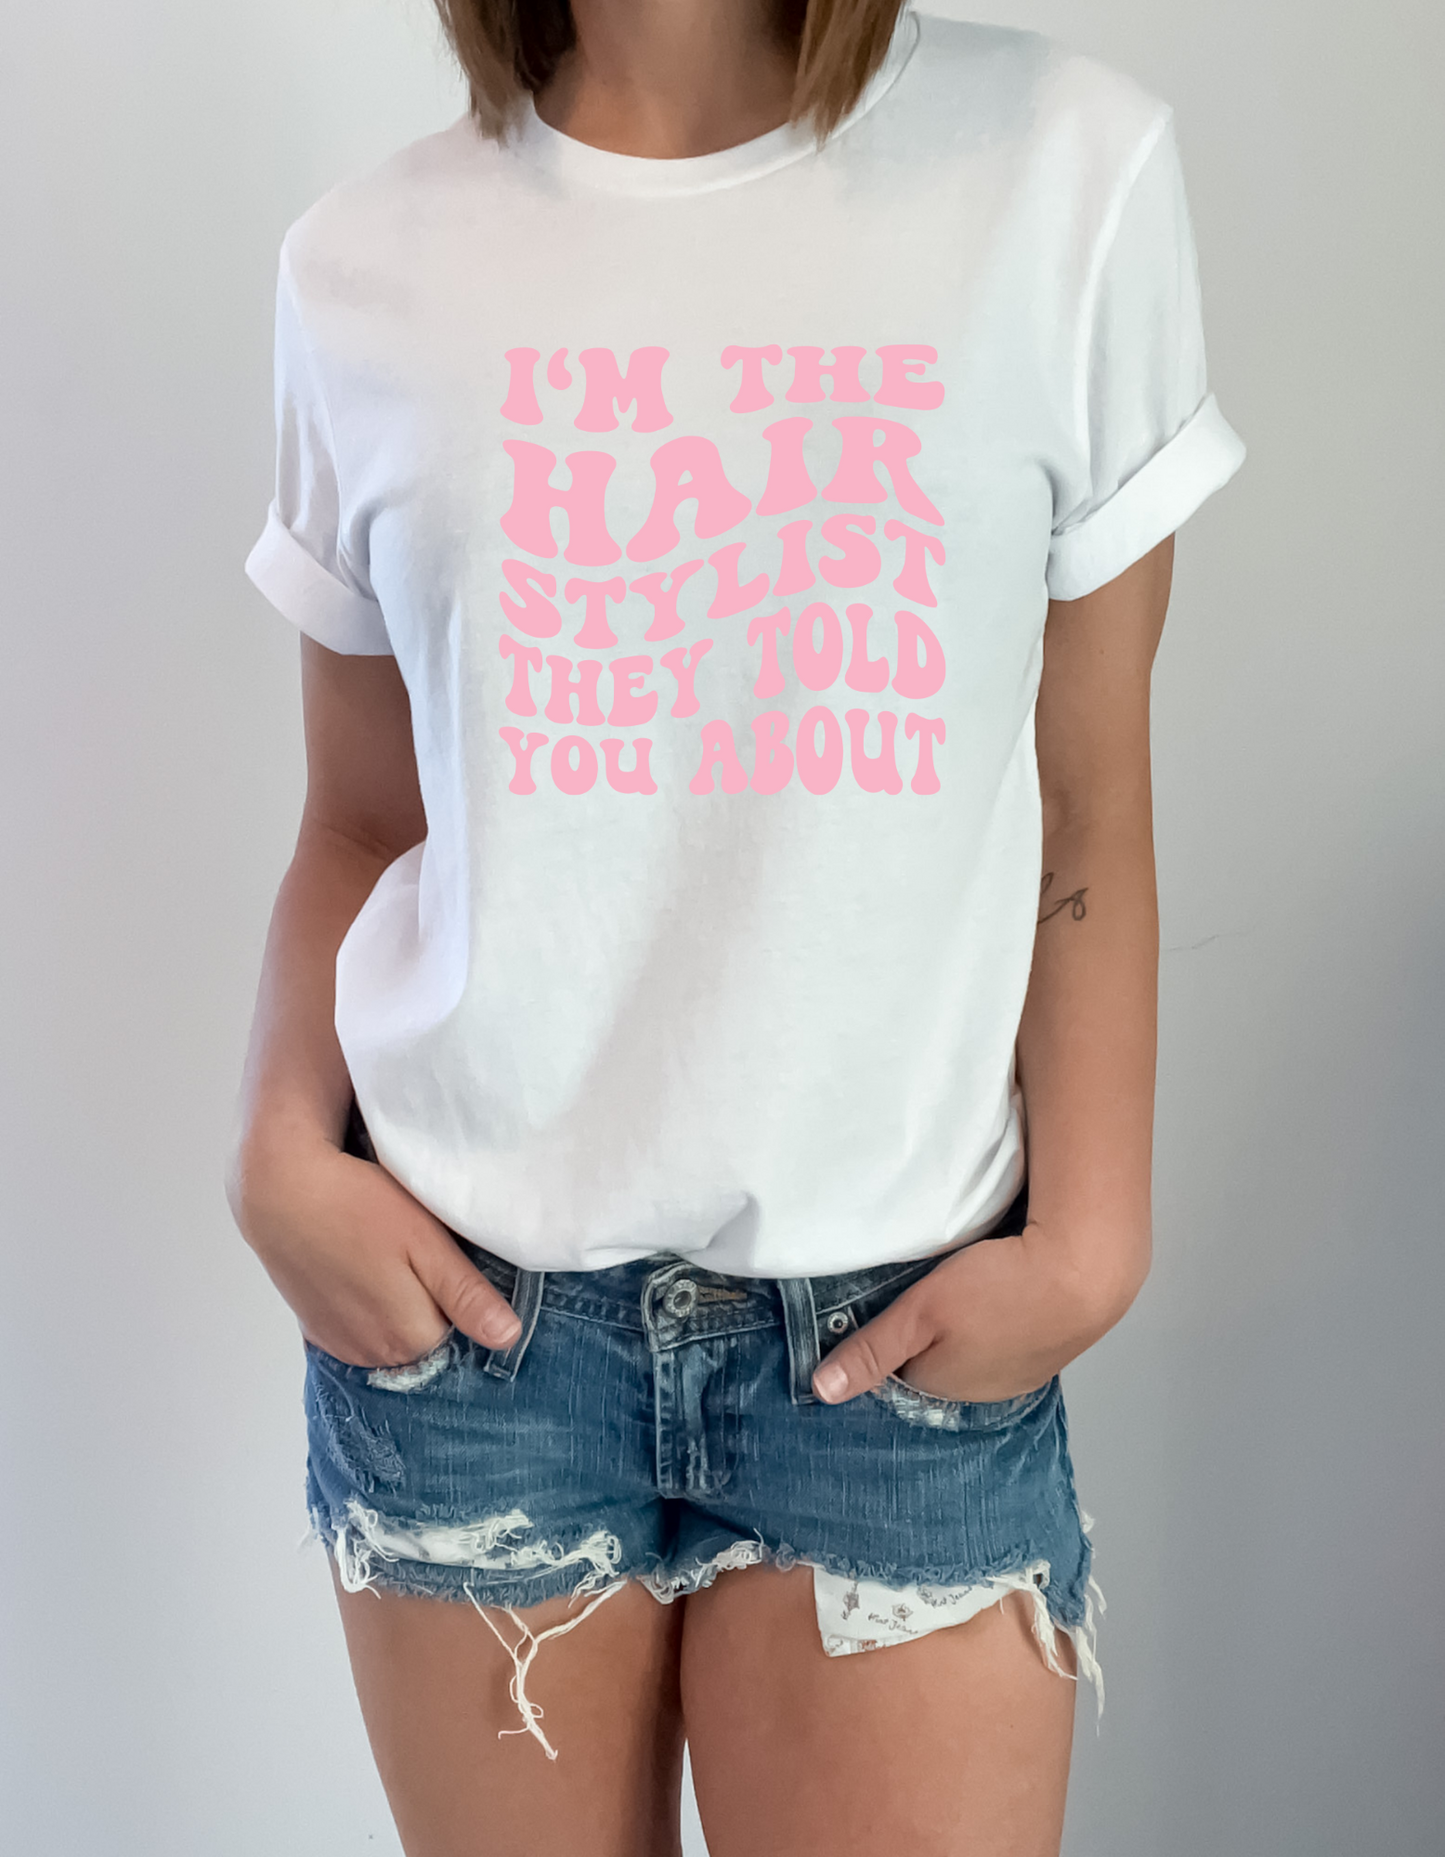 I'm the hairstylist they told you about T-shirt